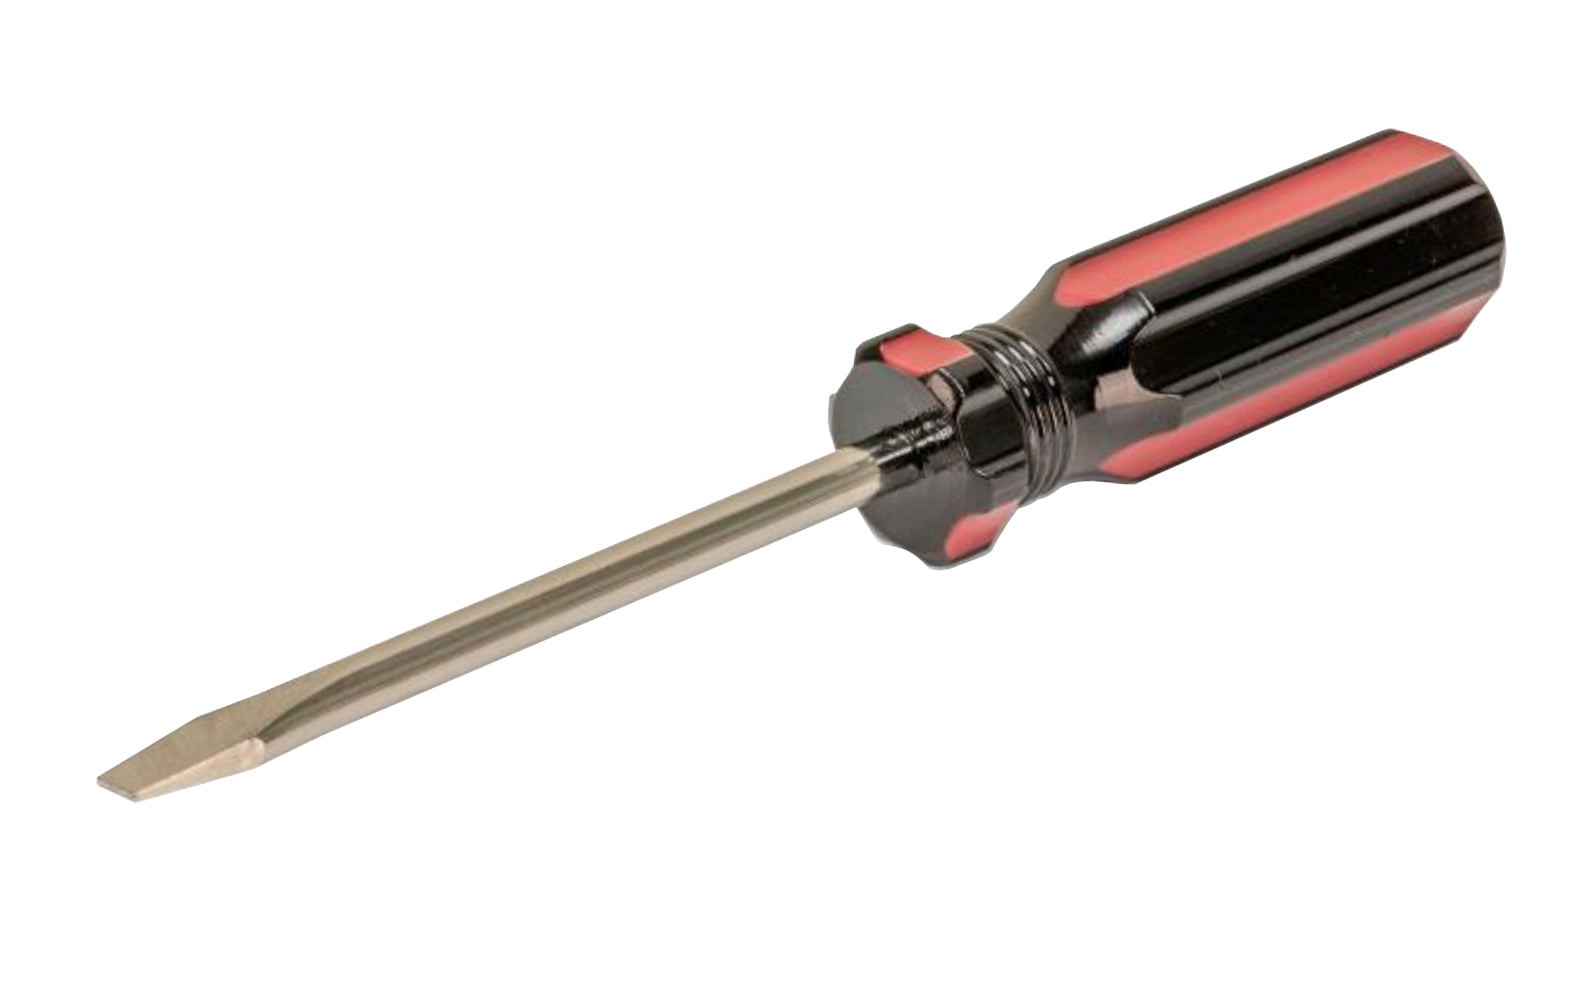 The GreatNeck 1/4" Slotted Screwdriver x 4" Long Blade features a high carbon steel blade for strength & nickel plating to resist rust. The extruded high impact plastic handle provides durability & extra gripping power. Made by Great Neck.  Made in USA.